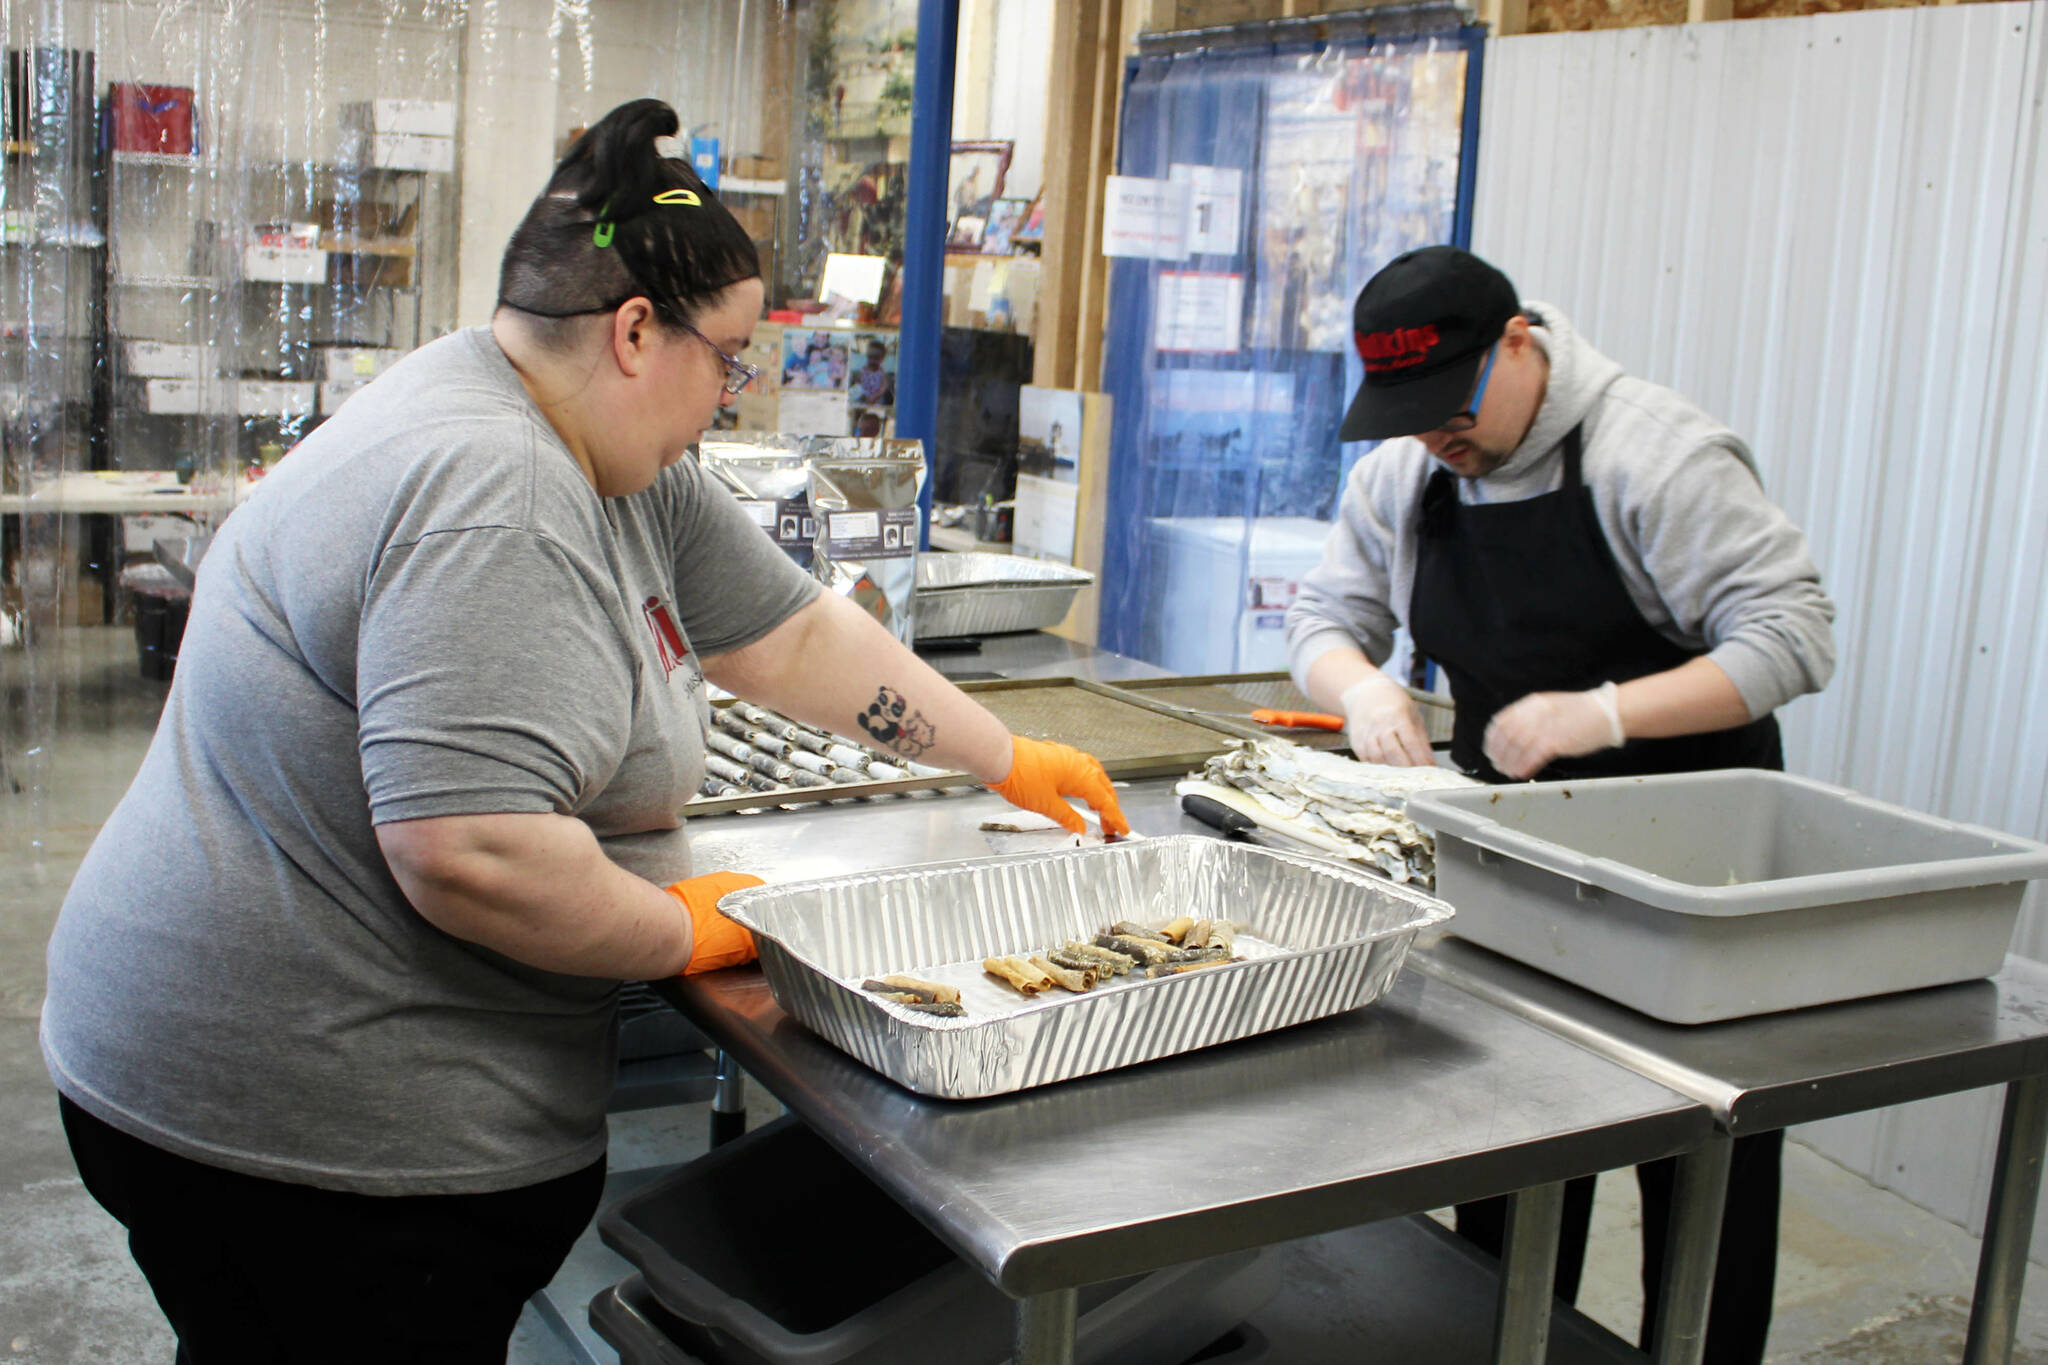 AlaSkins employees Lillie VanDevere (left) and Jeramie Davis (right) roll cod skins that will ultimately be sold as pet treats at AlaSkins on Thursday, July 6, 2023 in Soldotna, Alaska. (Ashlyn O’Hara/Peninsula Clarion)